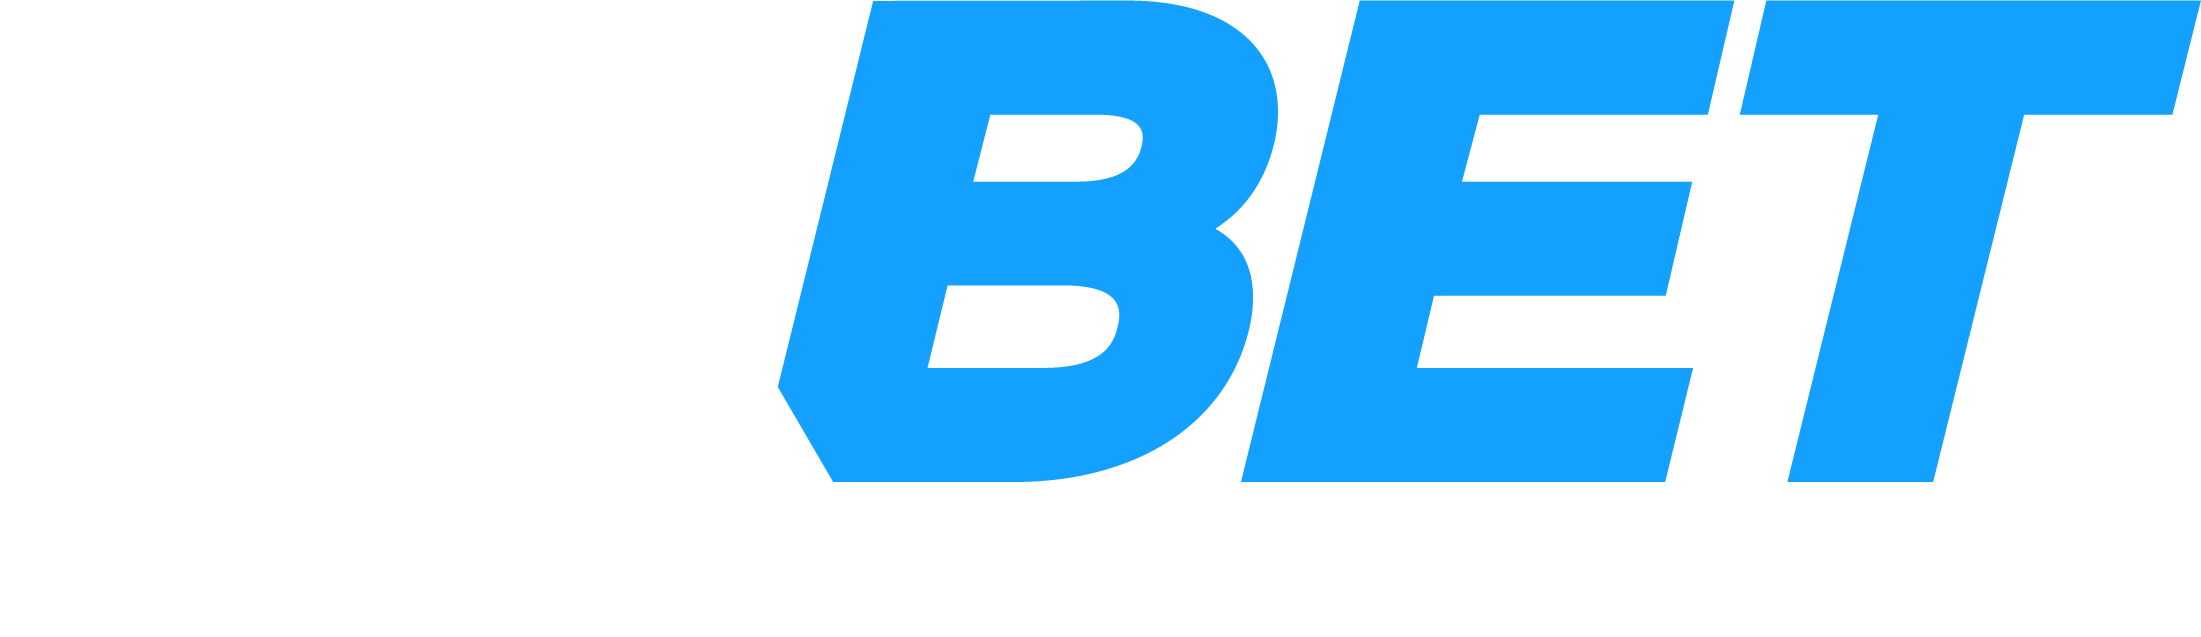 1xBet App - Android and iOS